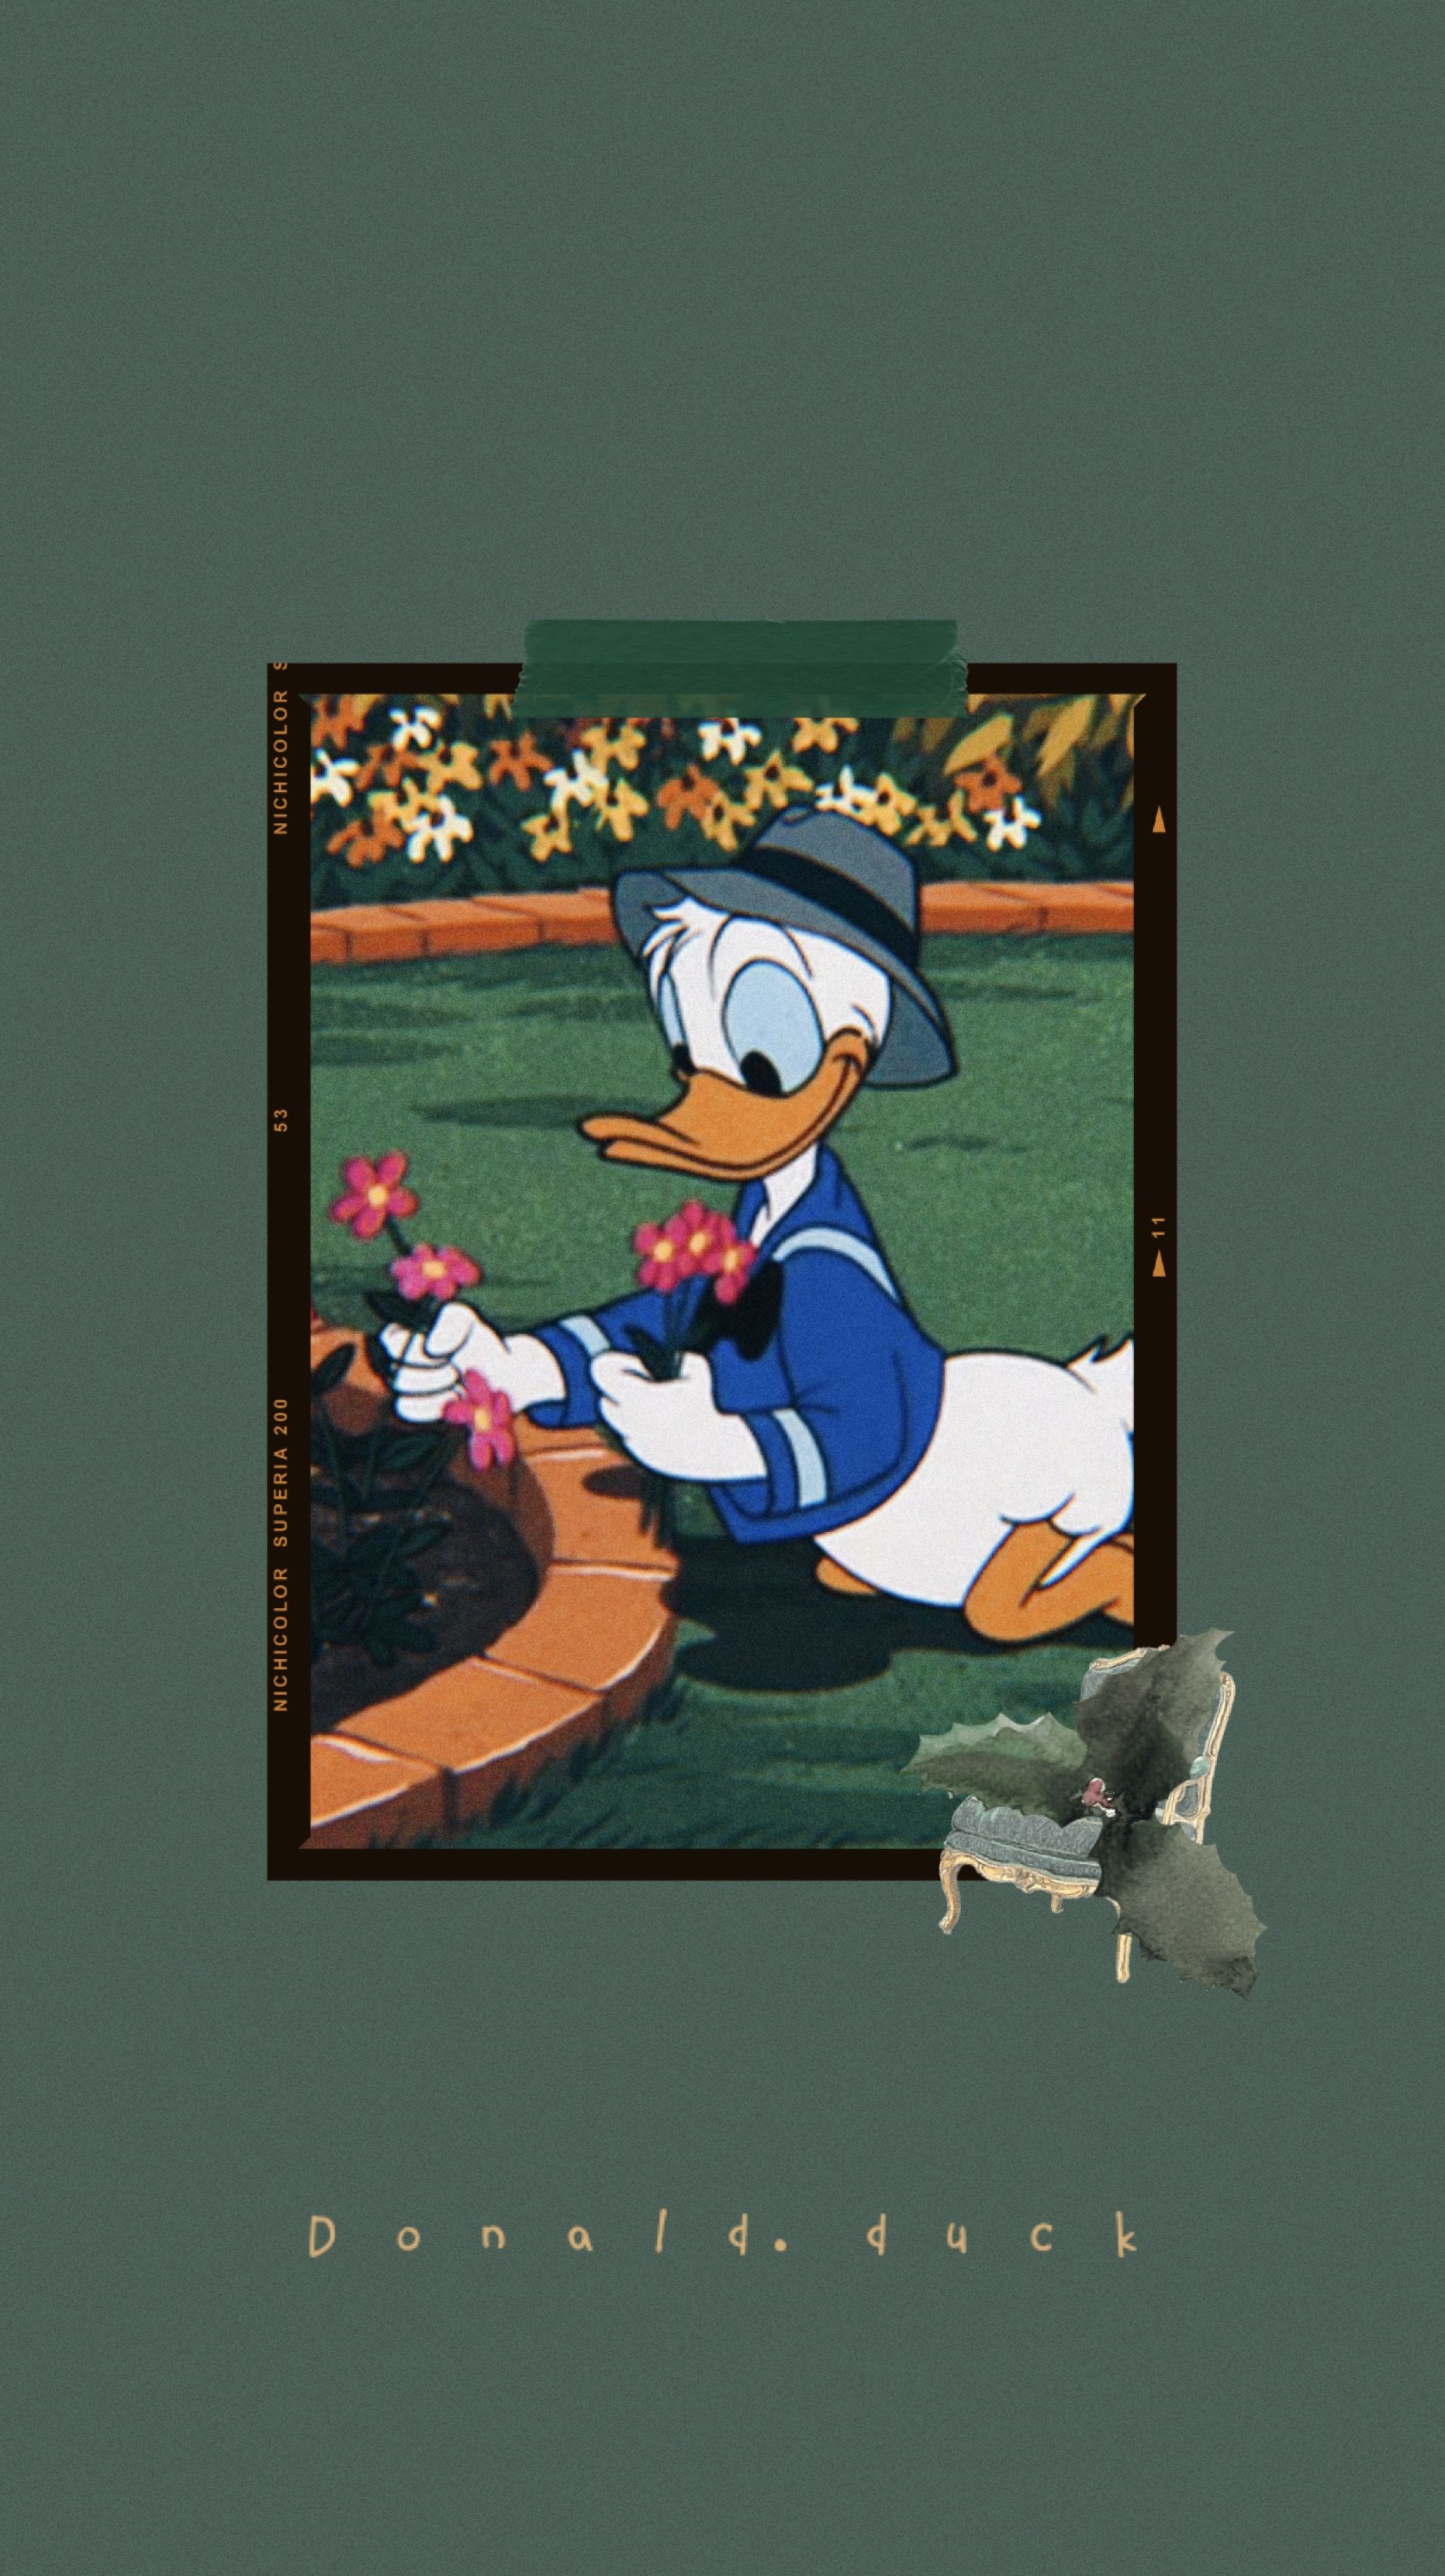 A cartoon of donald duck and his dog - Duck